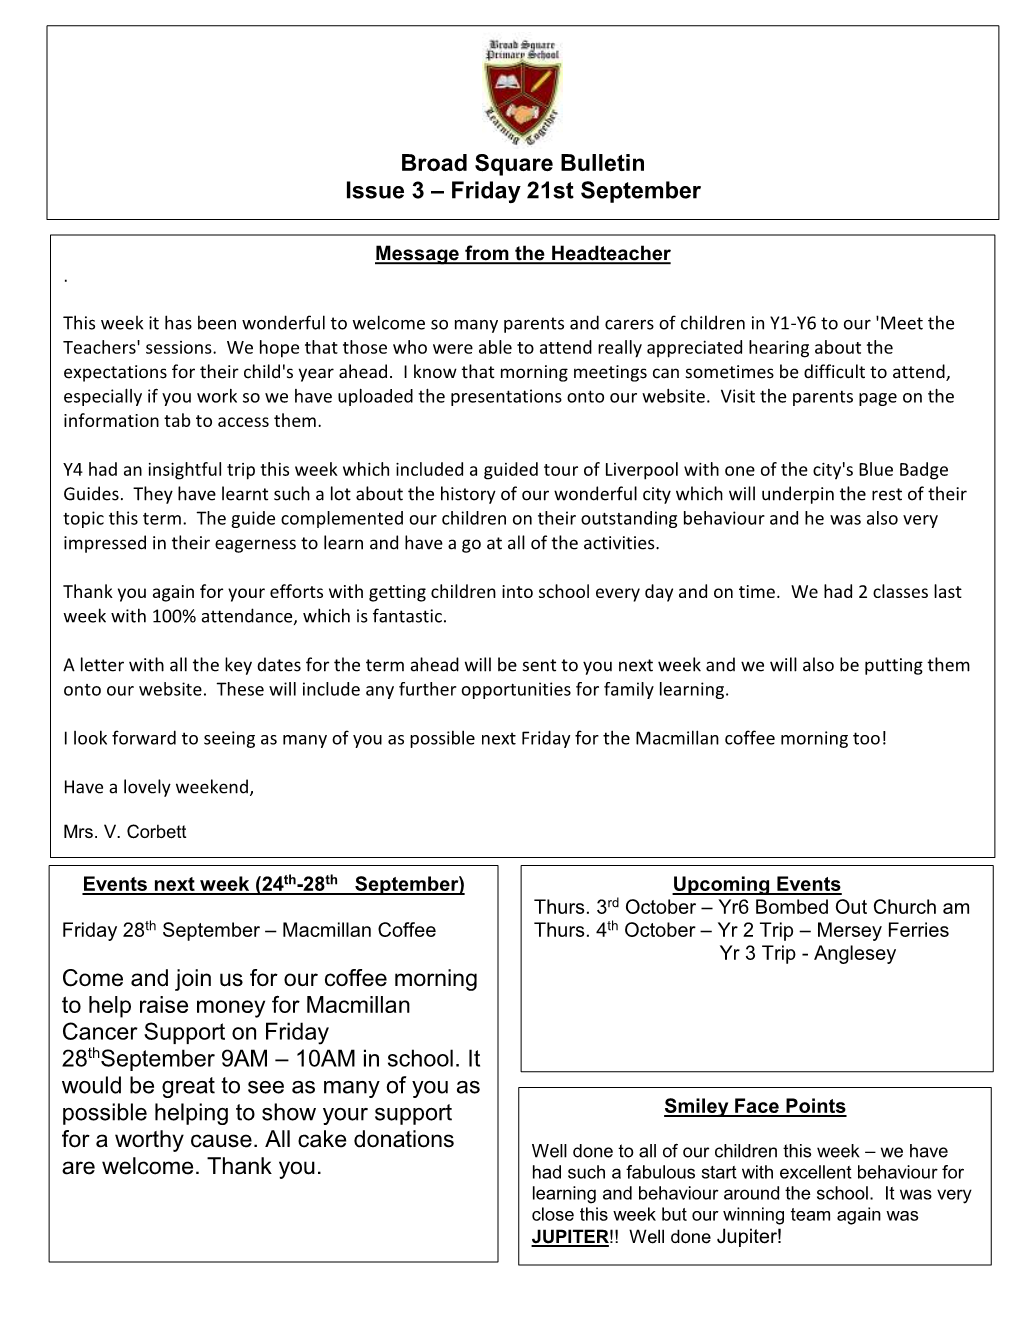 Broad Square Bulletin Issue 3 – Friday 21St September